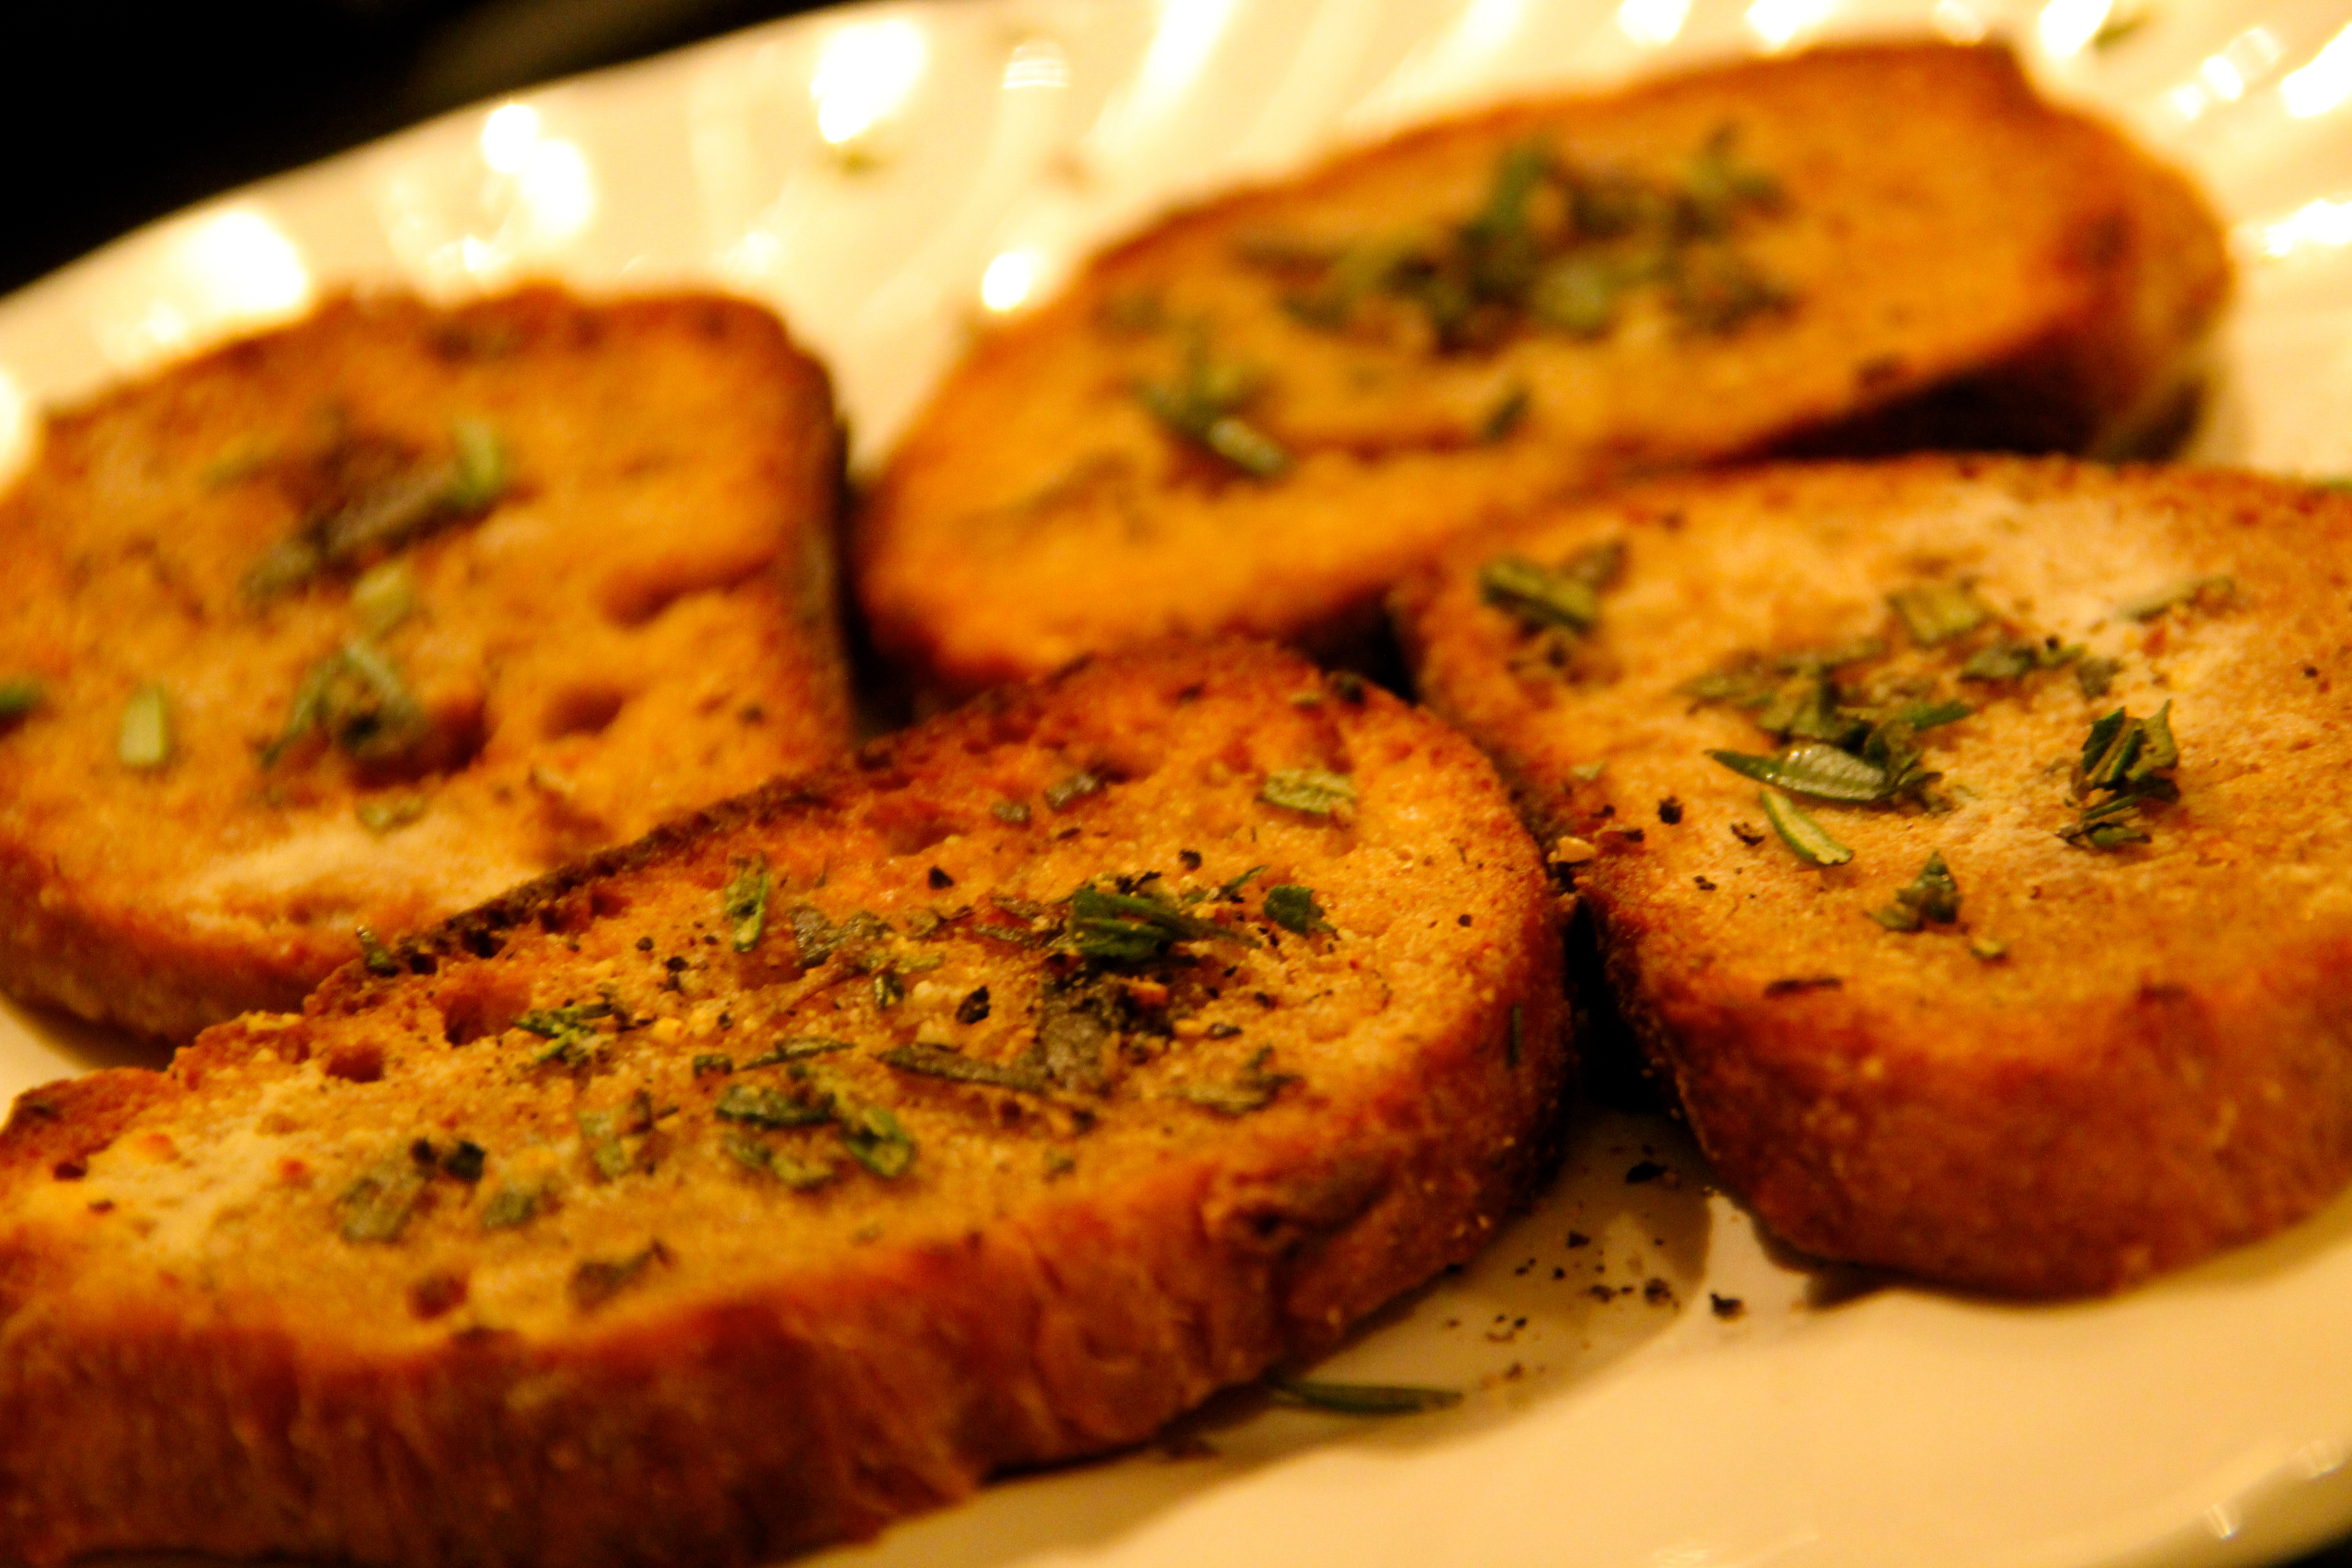 Pain Grillé Au Le Romarin  (Grilled Rosemary French Bread)